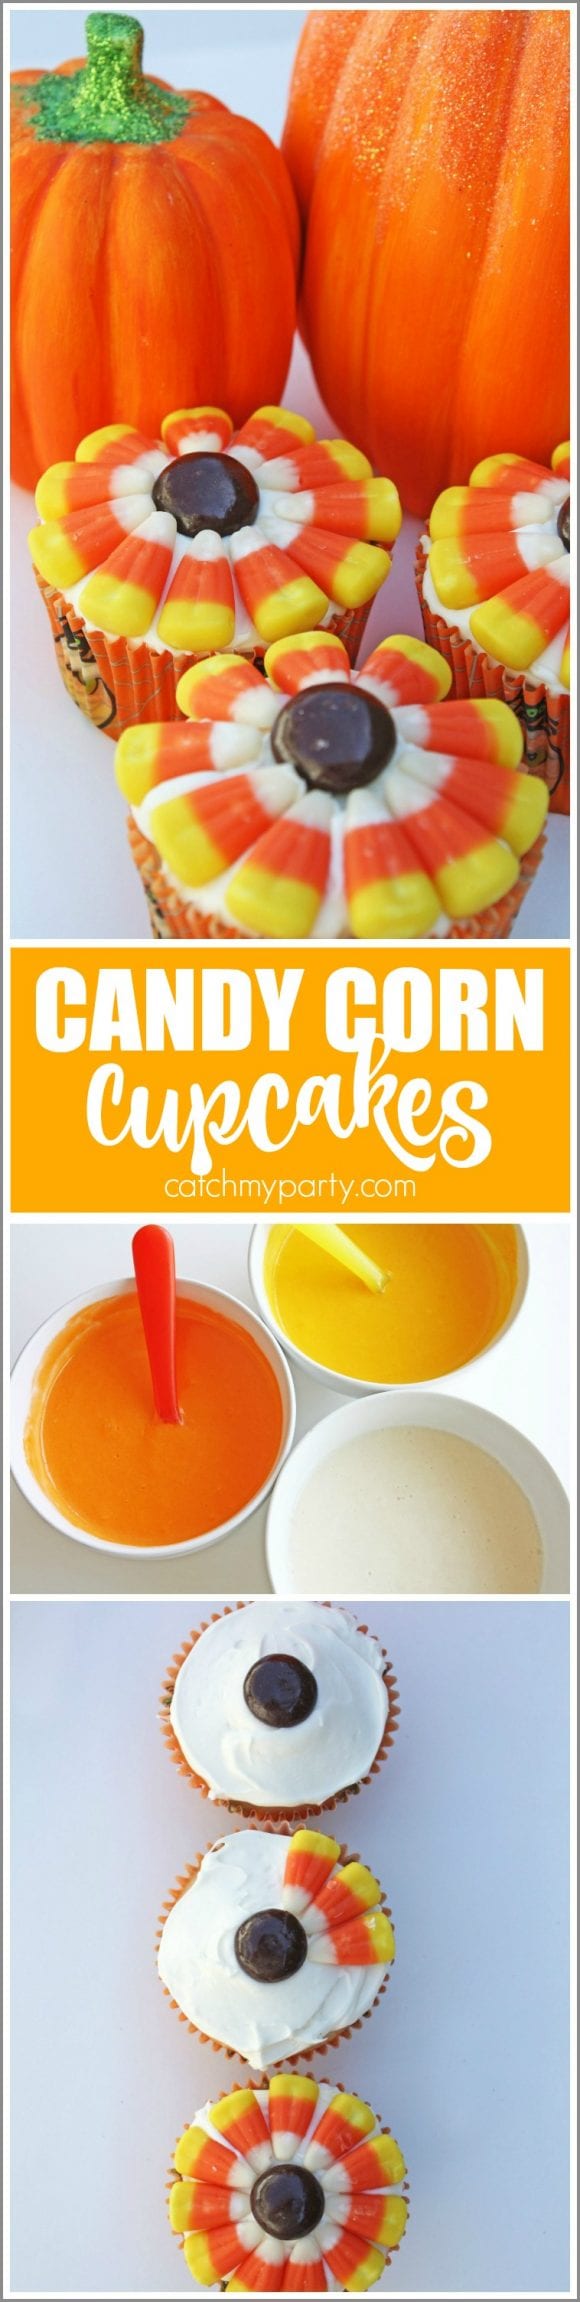 Fall Candy Corn Cupcakes | CatchMyParty.com